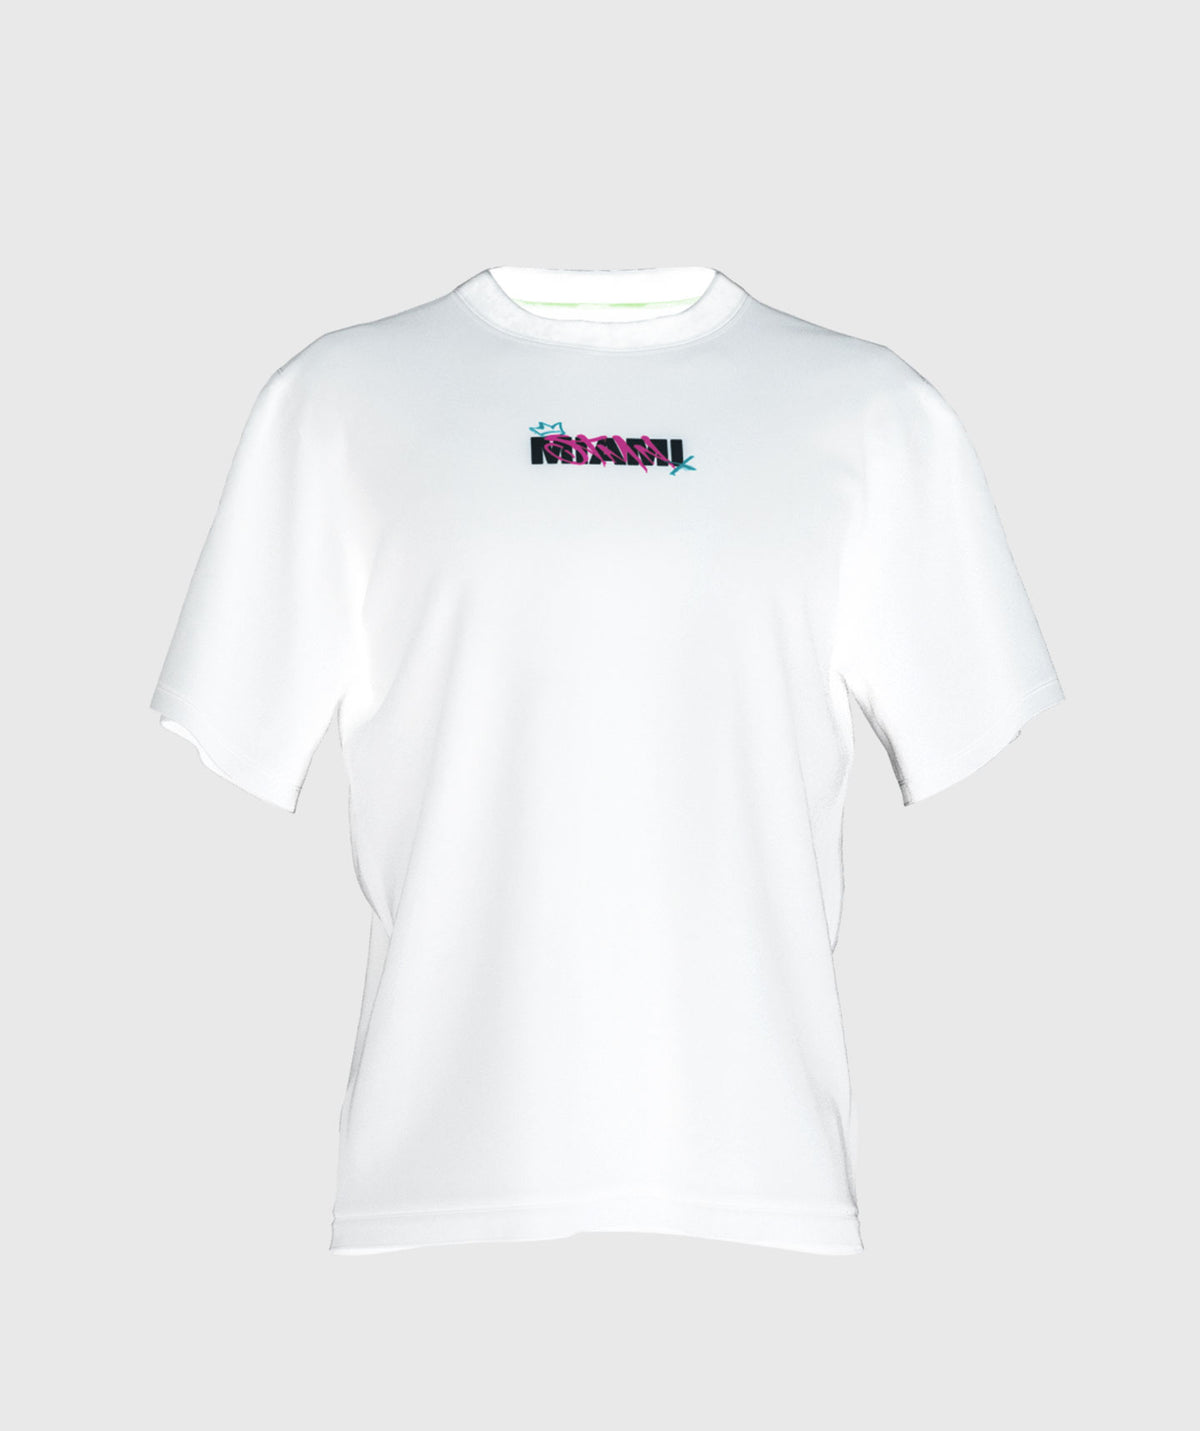 T-shirt "MIAMI 24" Loose-Fit White